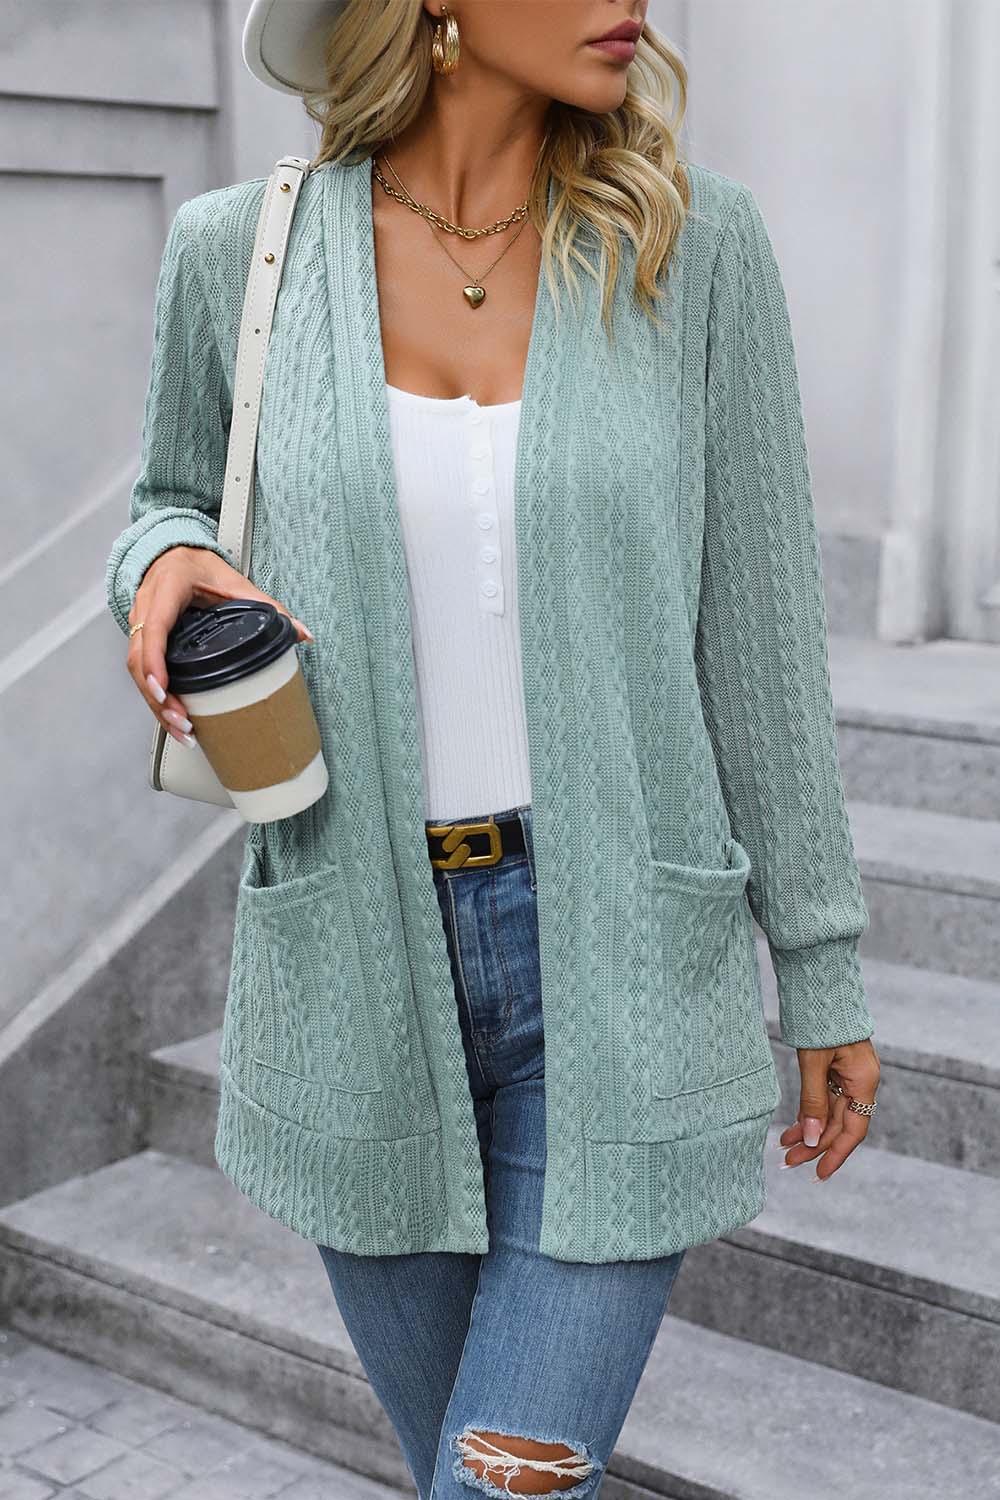 Cable-Knit Long Sleeve Cardigan with Pocket - Teal / S - Women’s Clothing & Accessories - Shirts & Tops - 10 - 2024